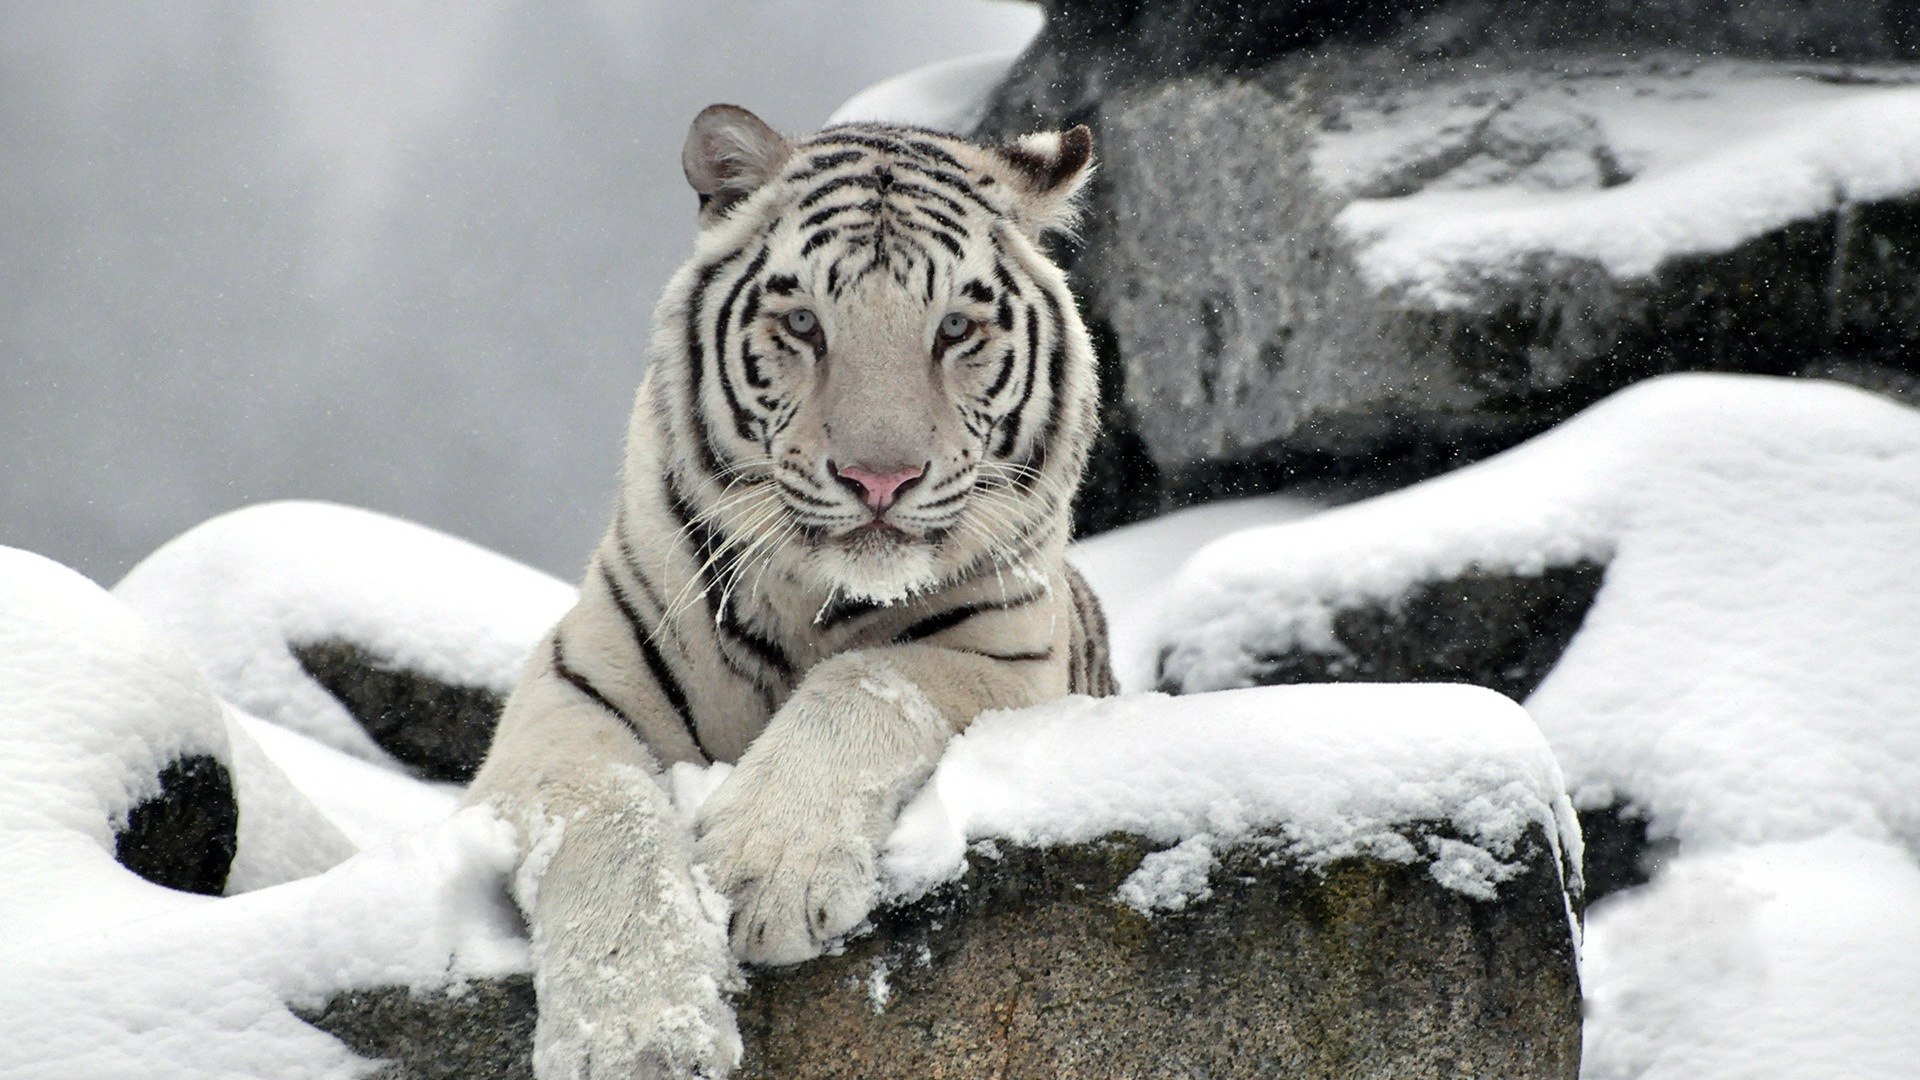 White Tigers In Snow - HD Wallpaper 